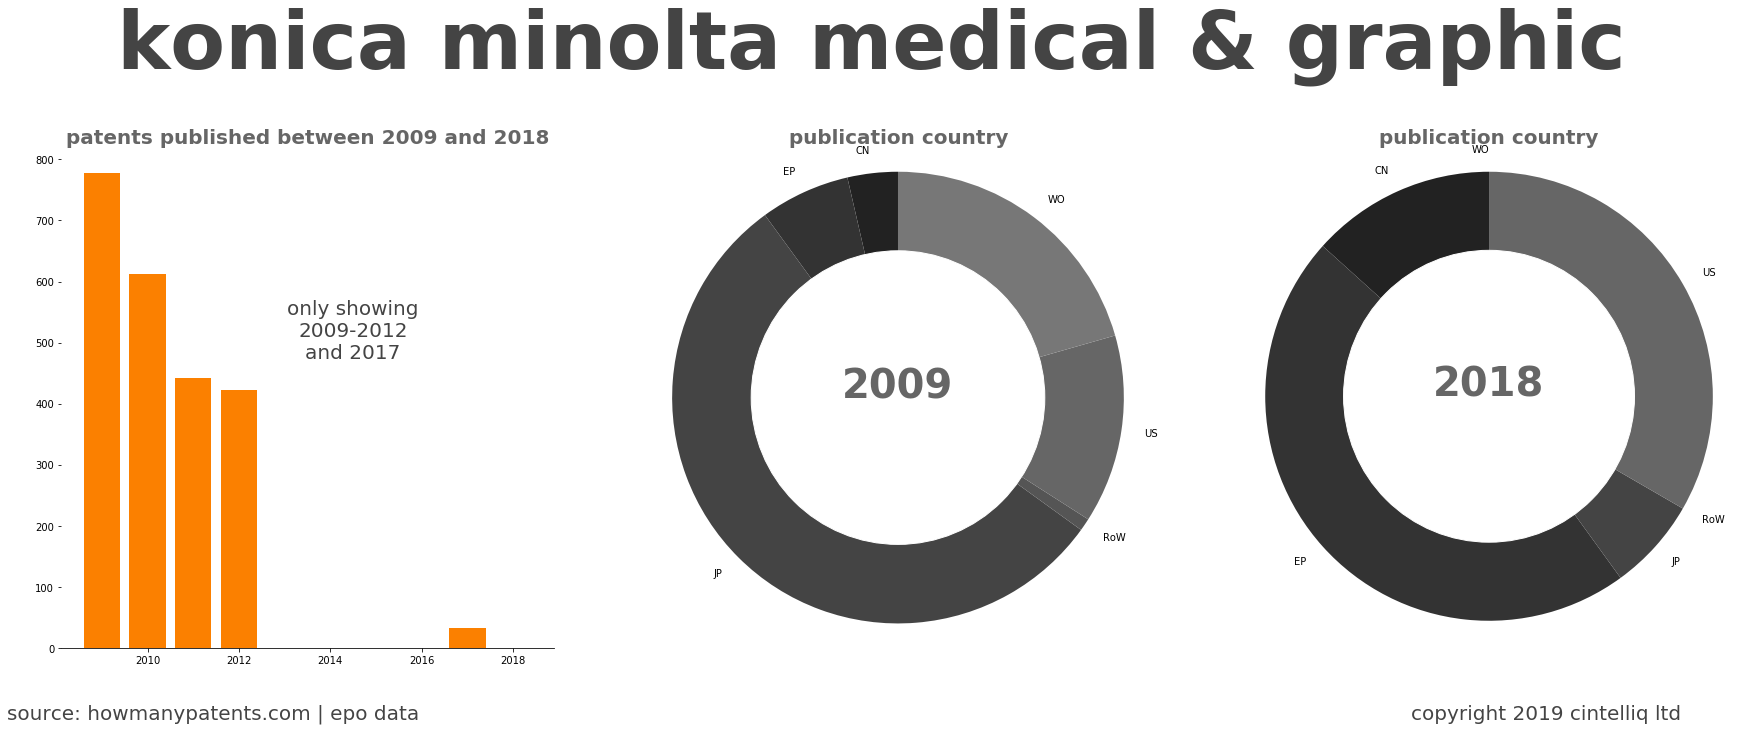 summary of patents for Konica Minolta Medical & Graphic